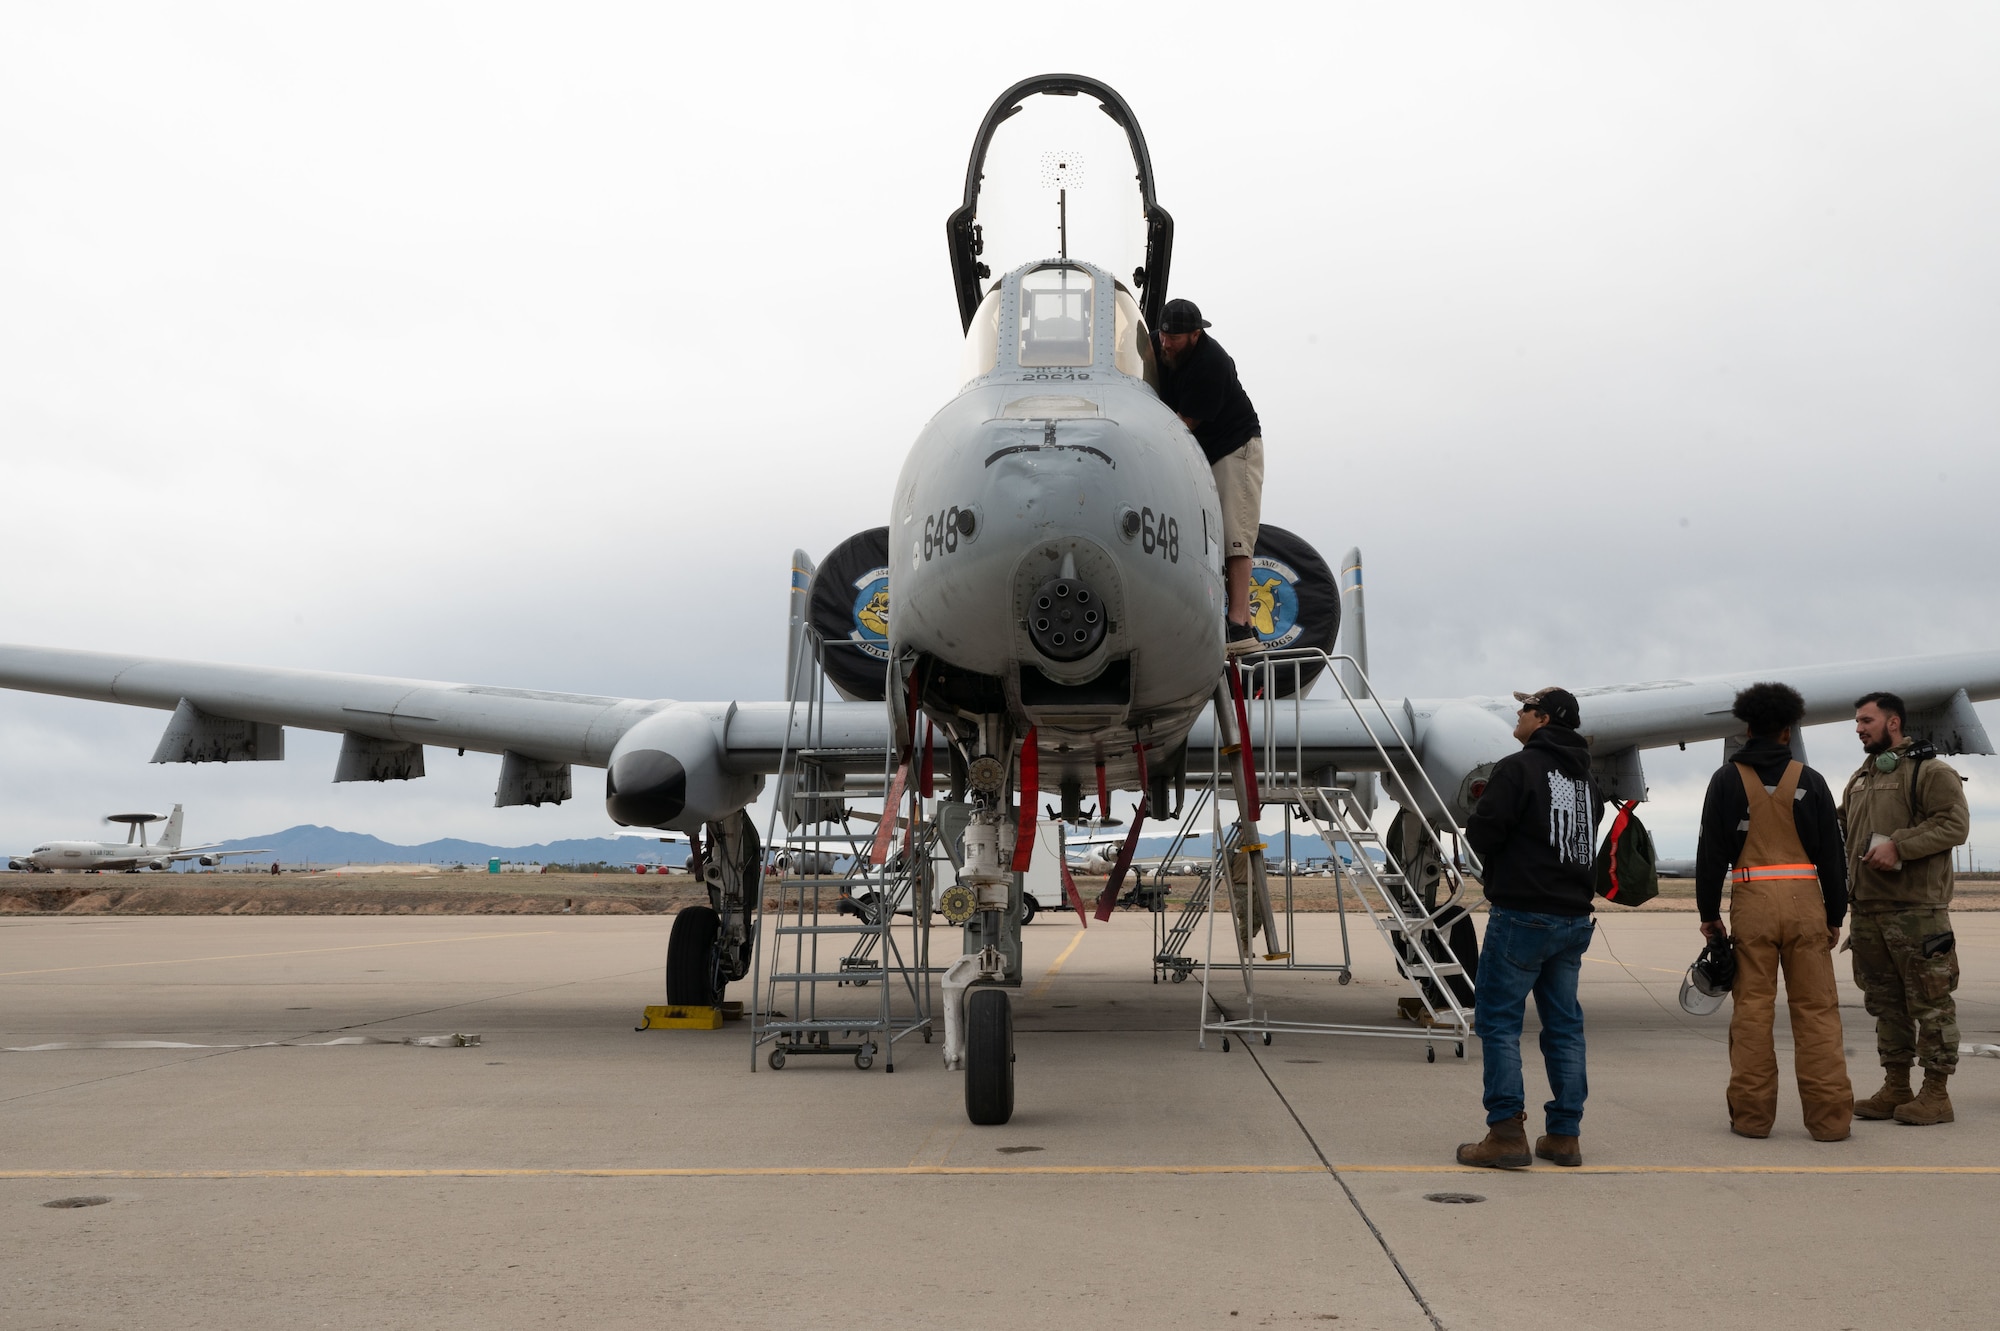 An A-10C Thunderbolt II aircraft is examined on at Davis-Monthan Air Force Base, Ariz., Feb. 6, 2024. The A-10C model featured a .30mm GAU-8/A rotary cannon protruding from the nose. (U.S. Air Force photo by Airman 1st Class Robert Allen Cooke III)